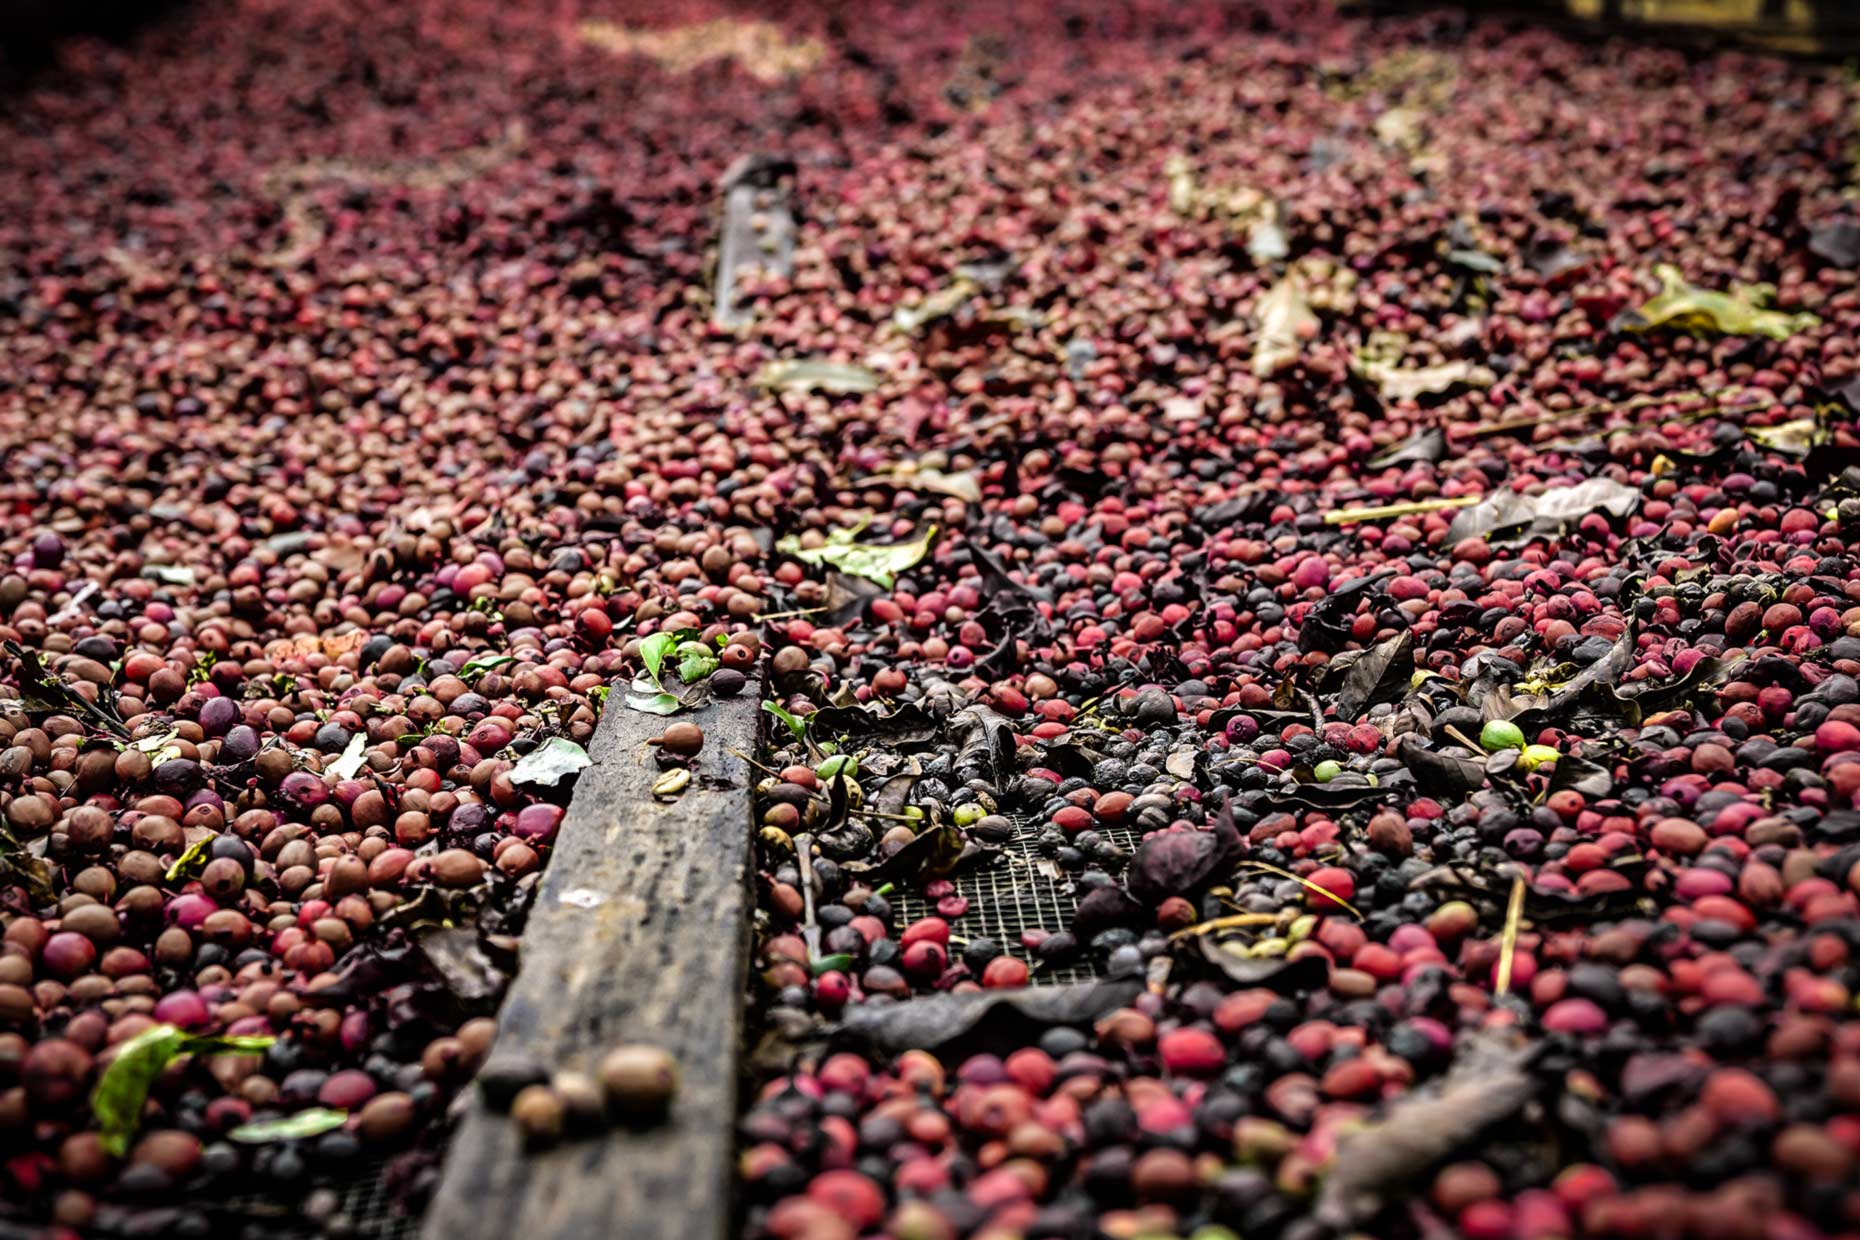 freshly picked coffee cherries on screen. Agriculture photography